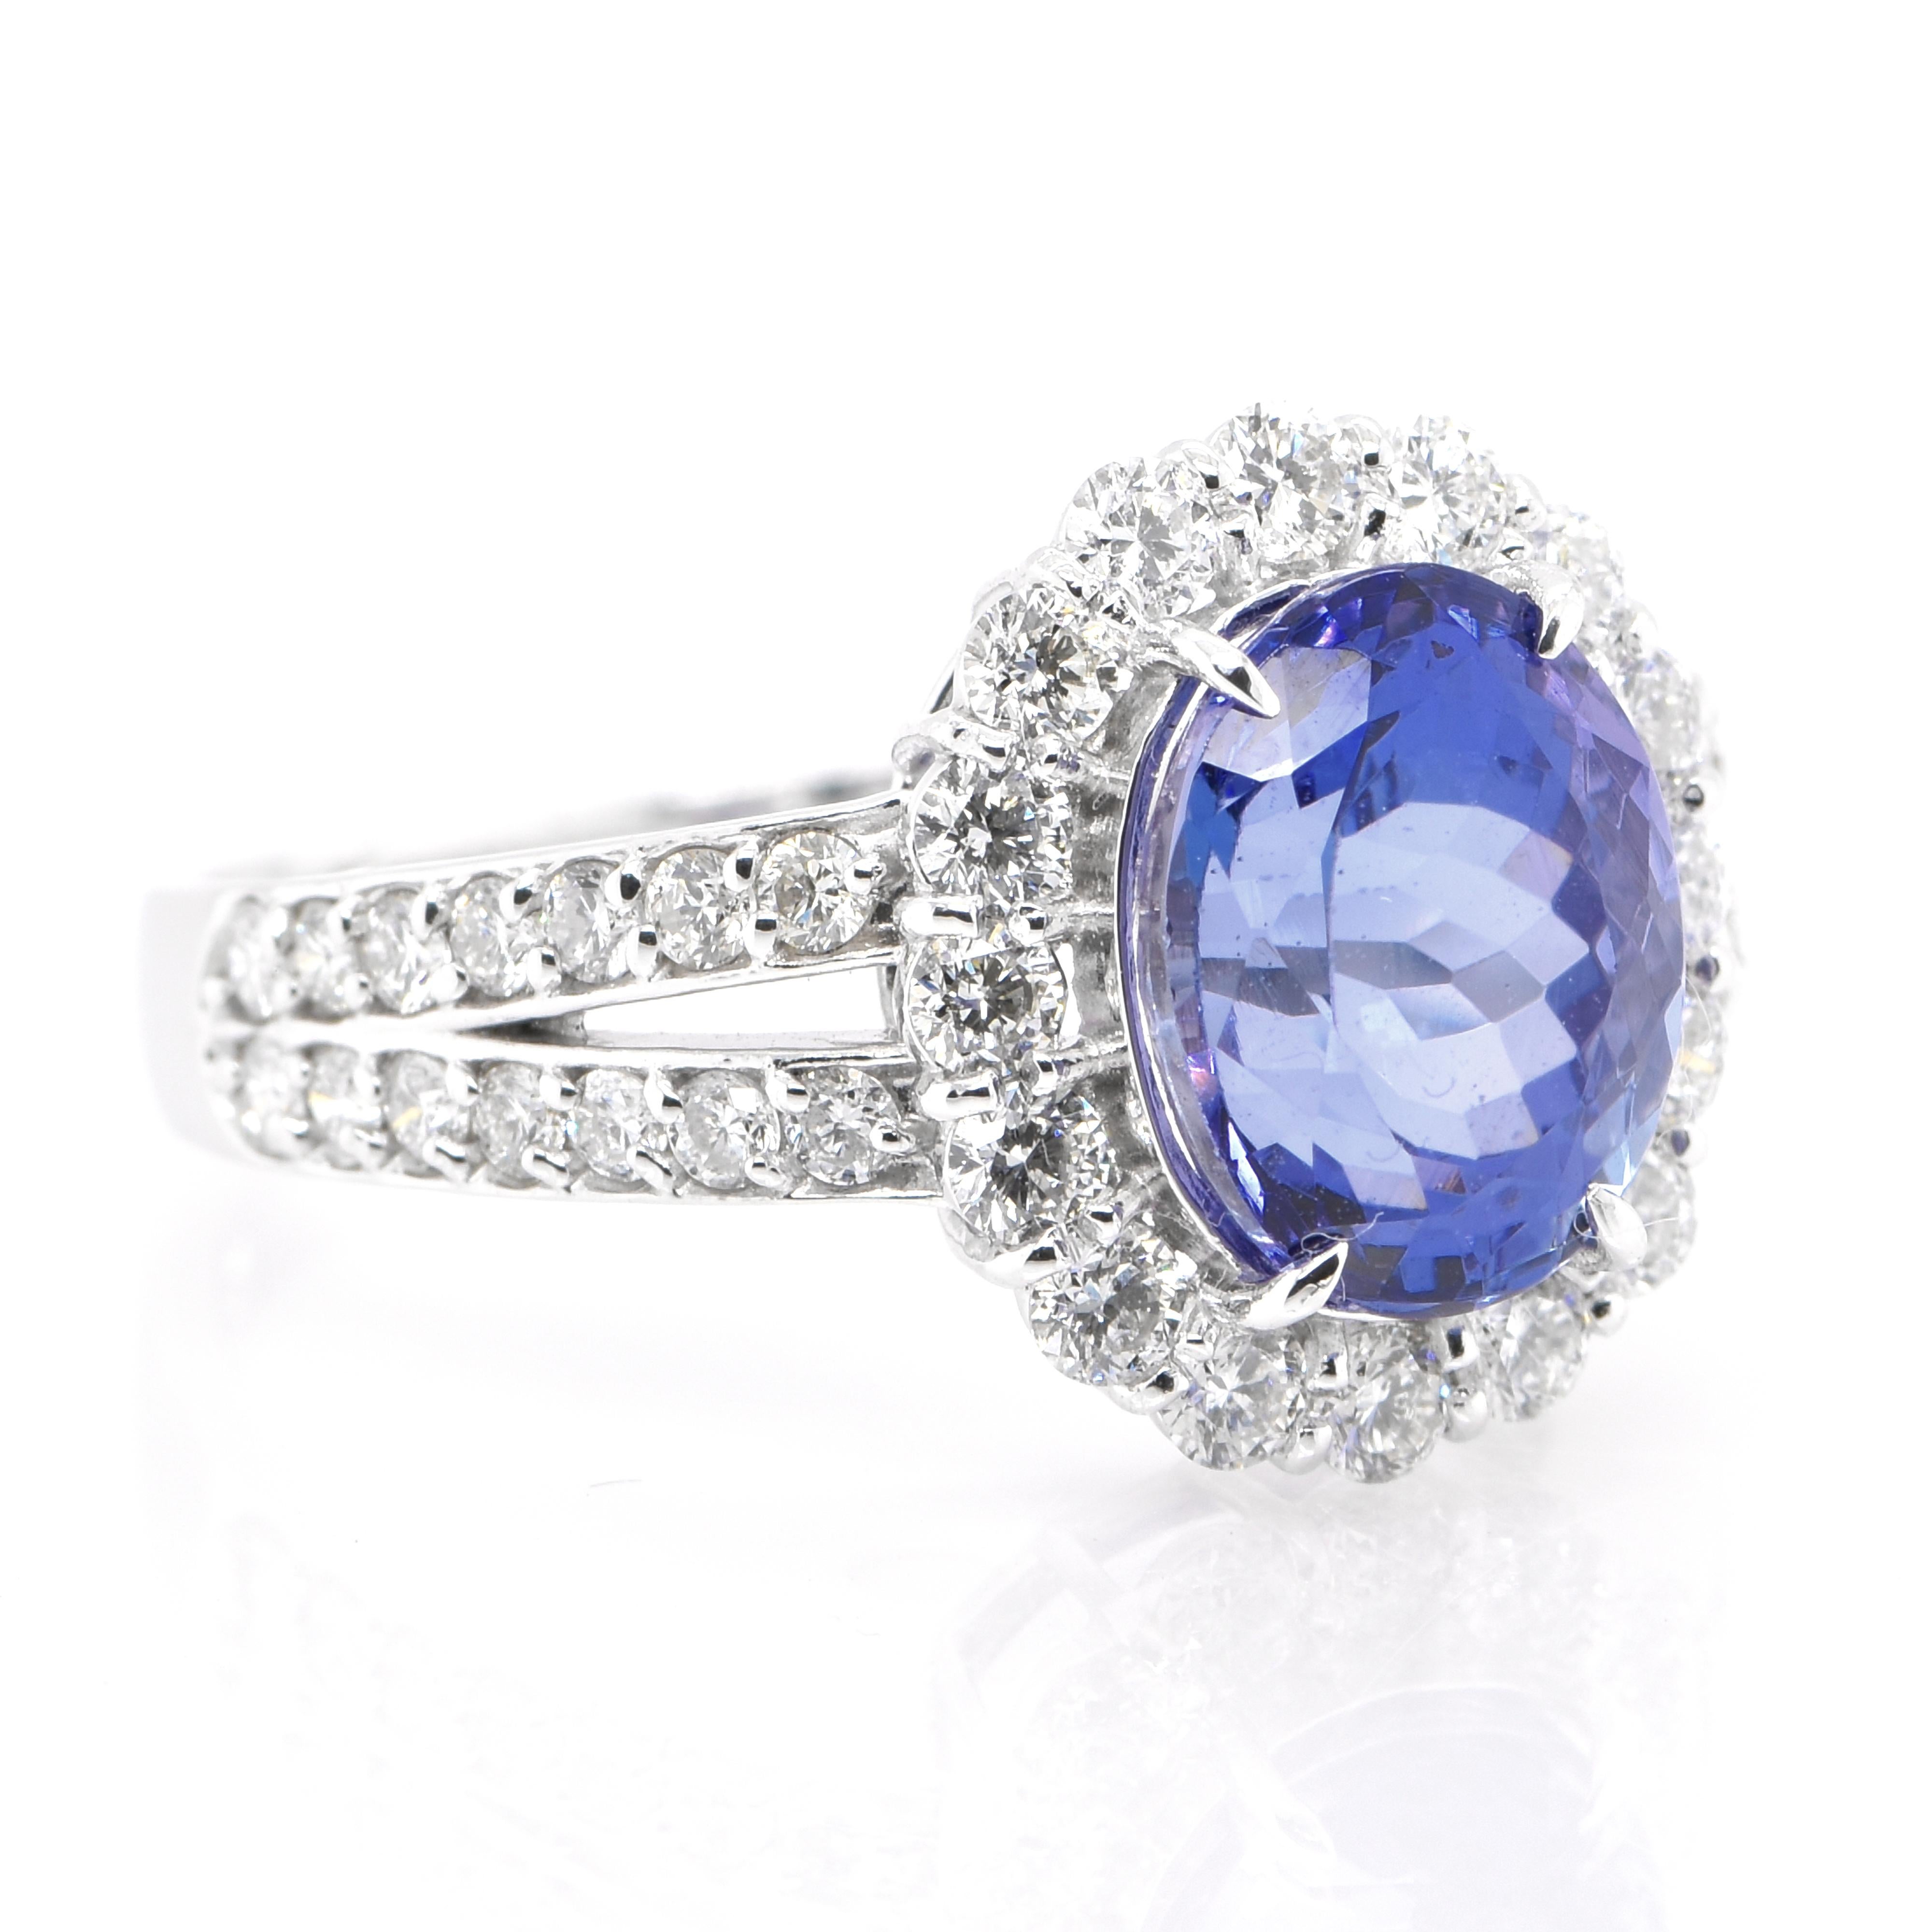 A beautiful ring featuring a 2.78 Carat Natural Tanzanite and 0.83 Carats of Diamond Accents set in Platinum. Tanzanite's name was given by Tiffany and Co after its only known source: Tanzania. Tanzanite displays beautiful pleochroic colors meaning